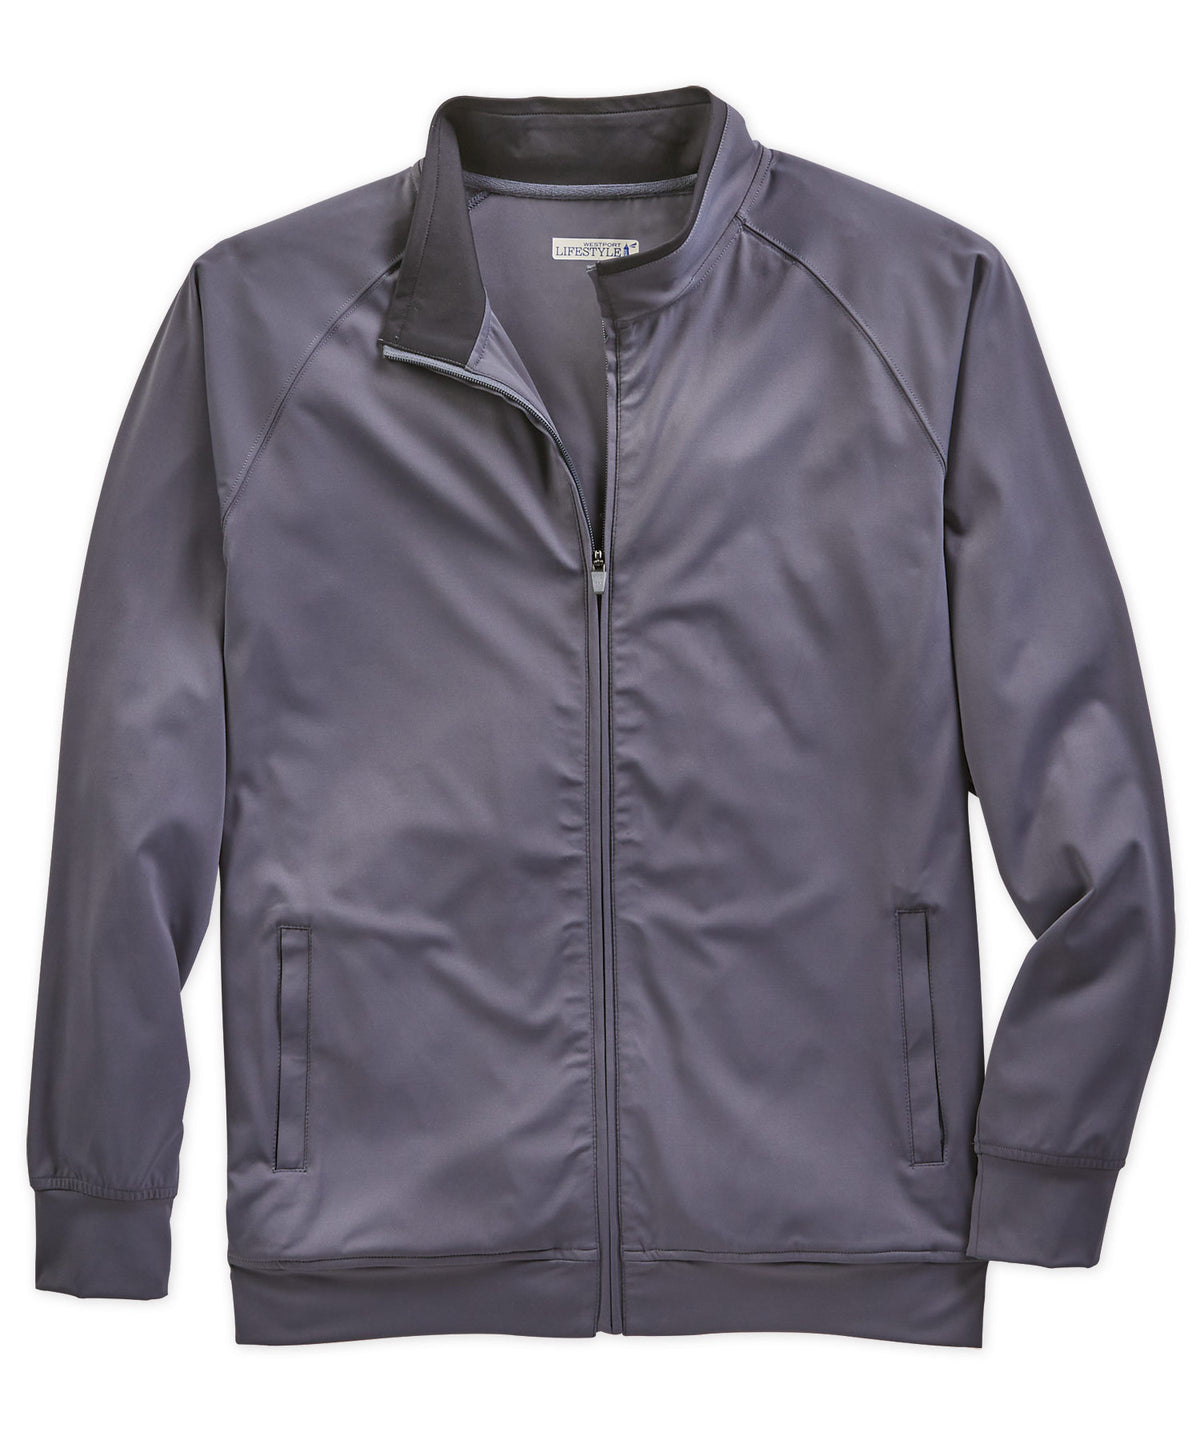 Westport Lifestyle All Day Performance Jacket, Big & Tall